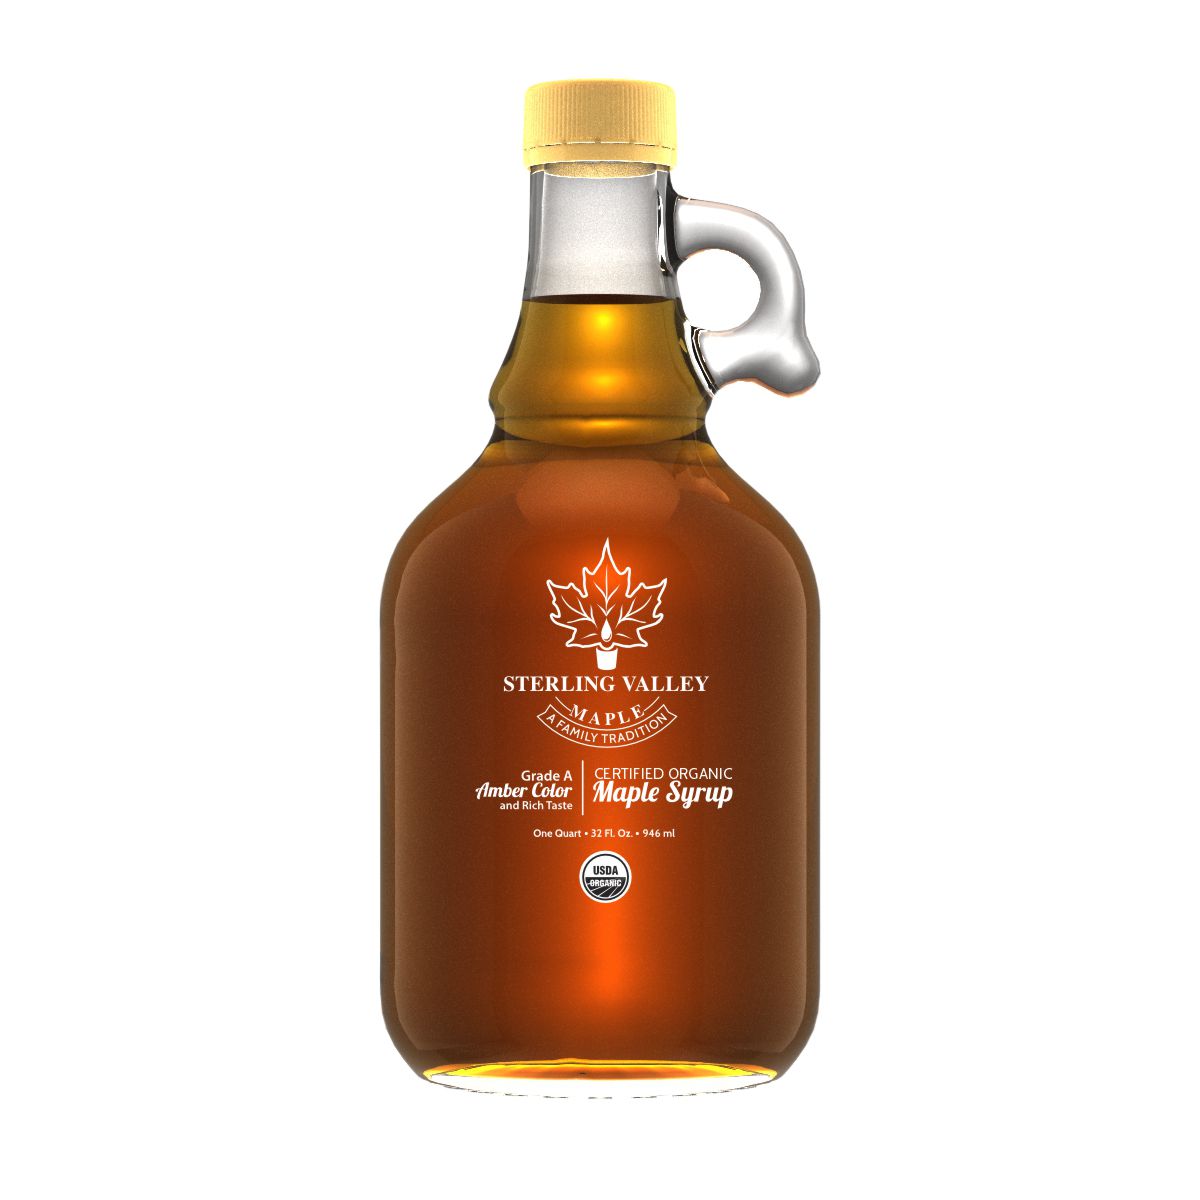 Certified Organic Maple Syrup: Amber Color with Rich Taste